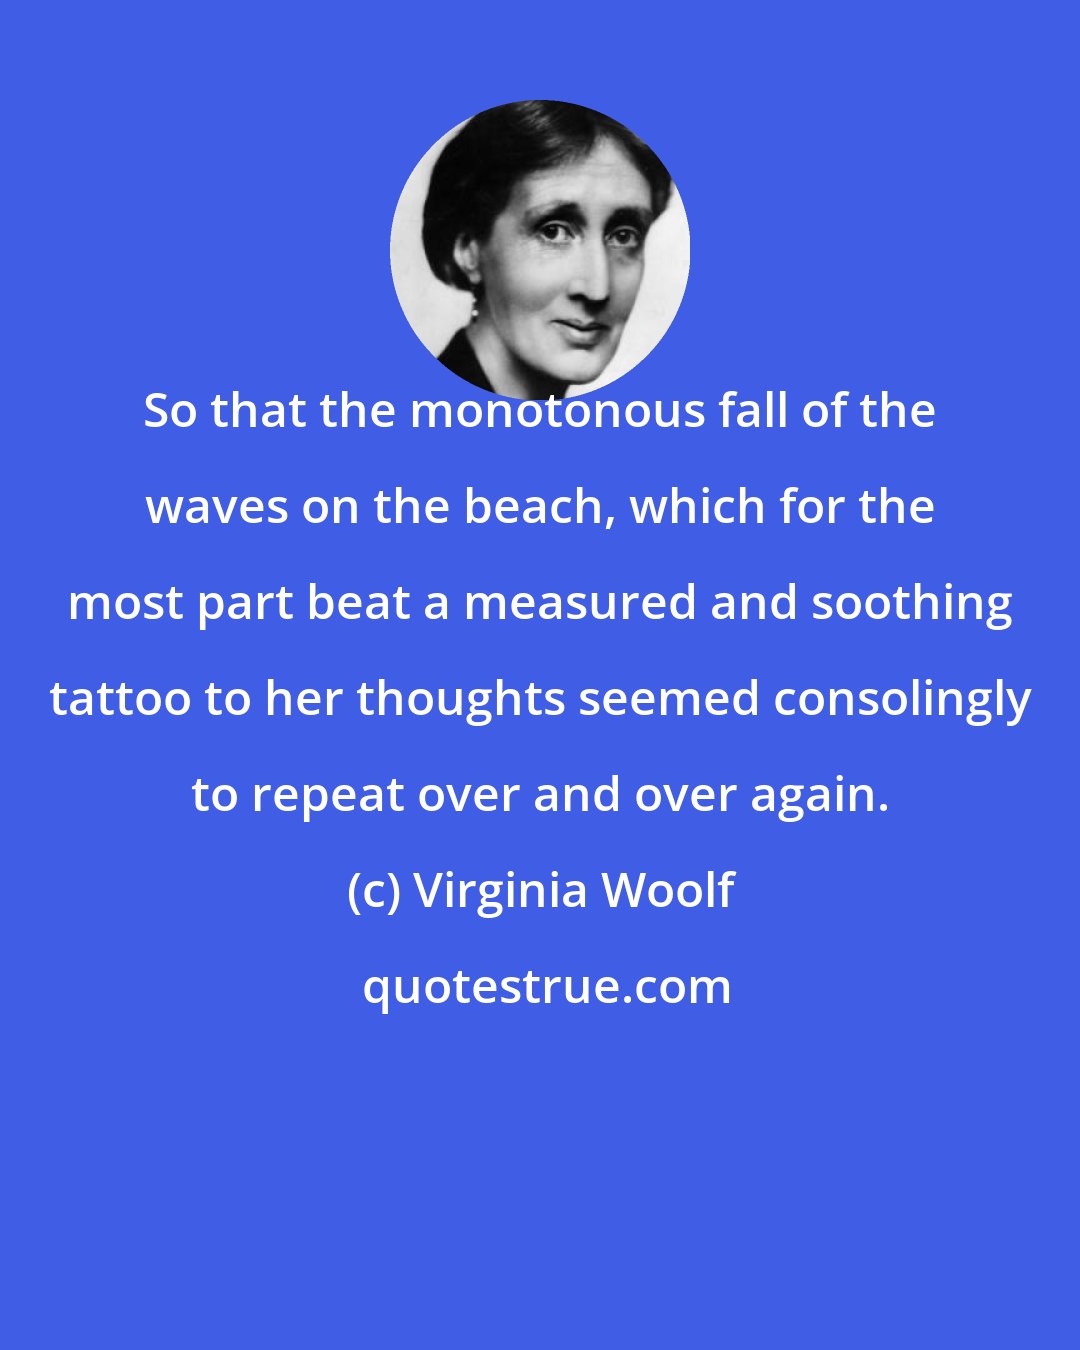 Virginia Woolf: So that the monotonous fall of the waves on the beach, which for the most part beat a measured and soothing tattoo to her thoughts seemed consolingly to repeat over and over again.